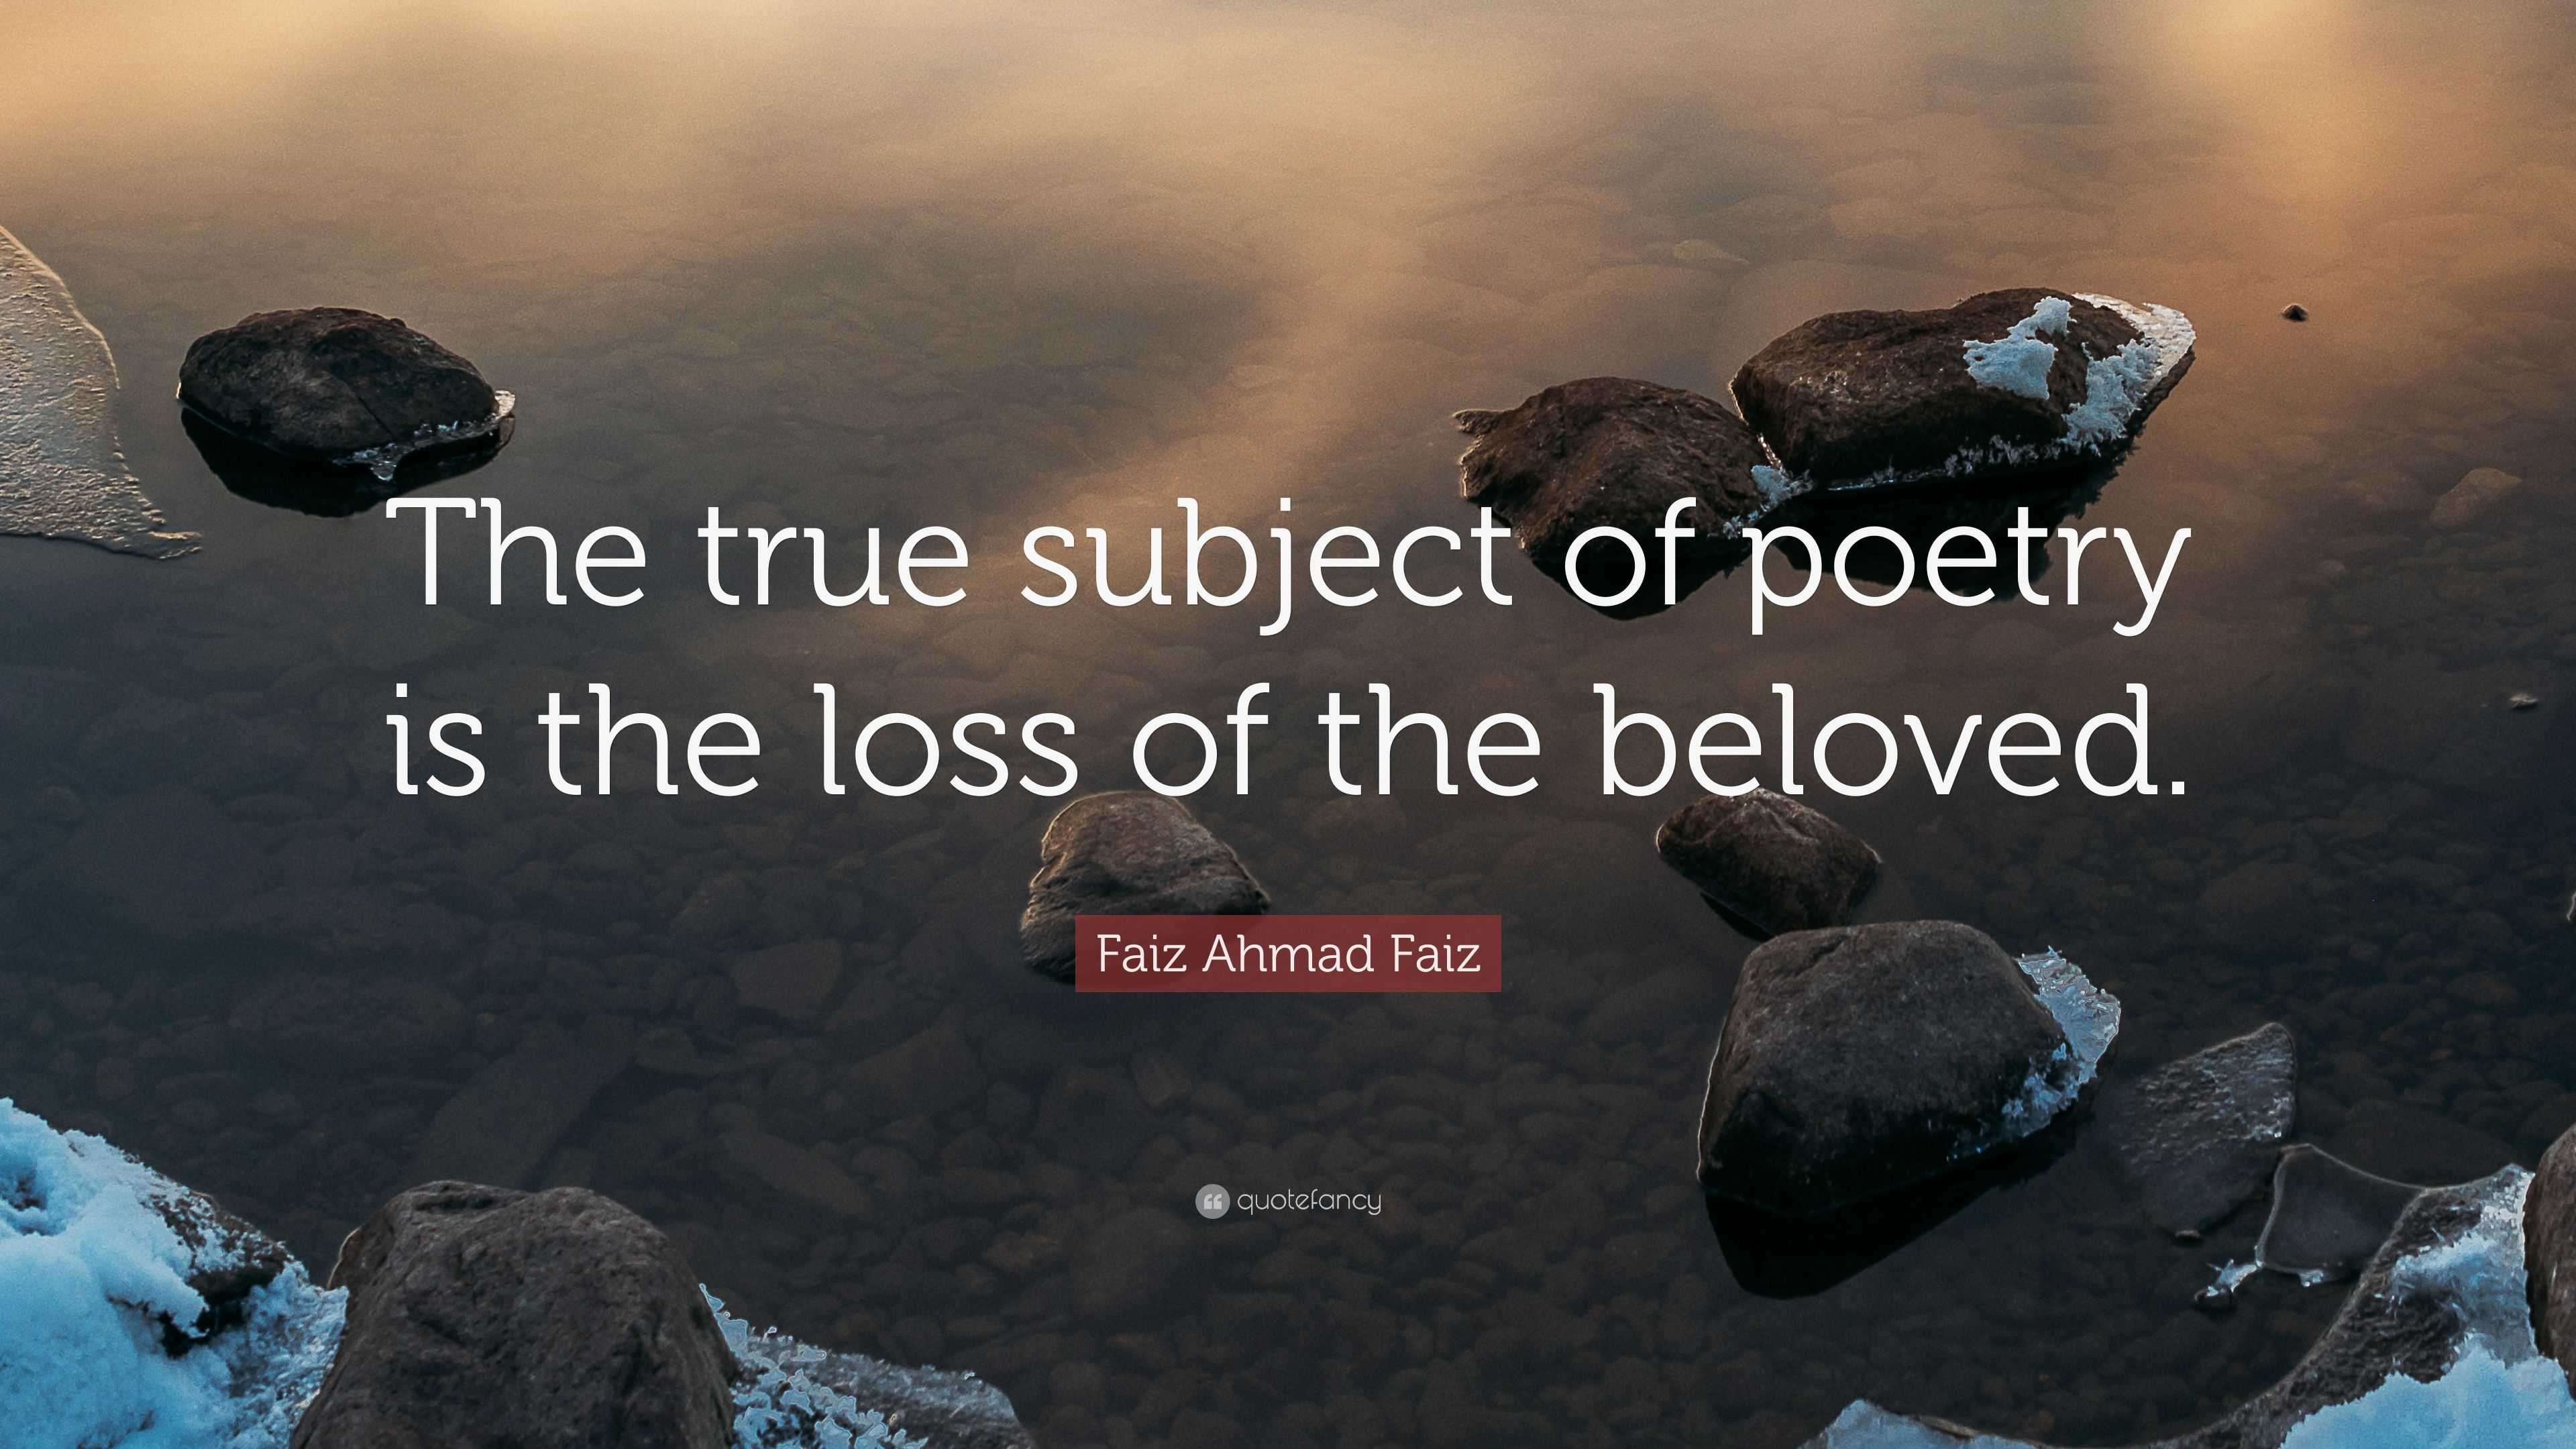 Faiz Ahmad Faiz Quote: “The true subject of poetry is the loss of the